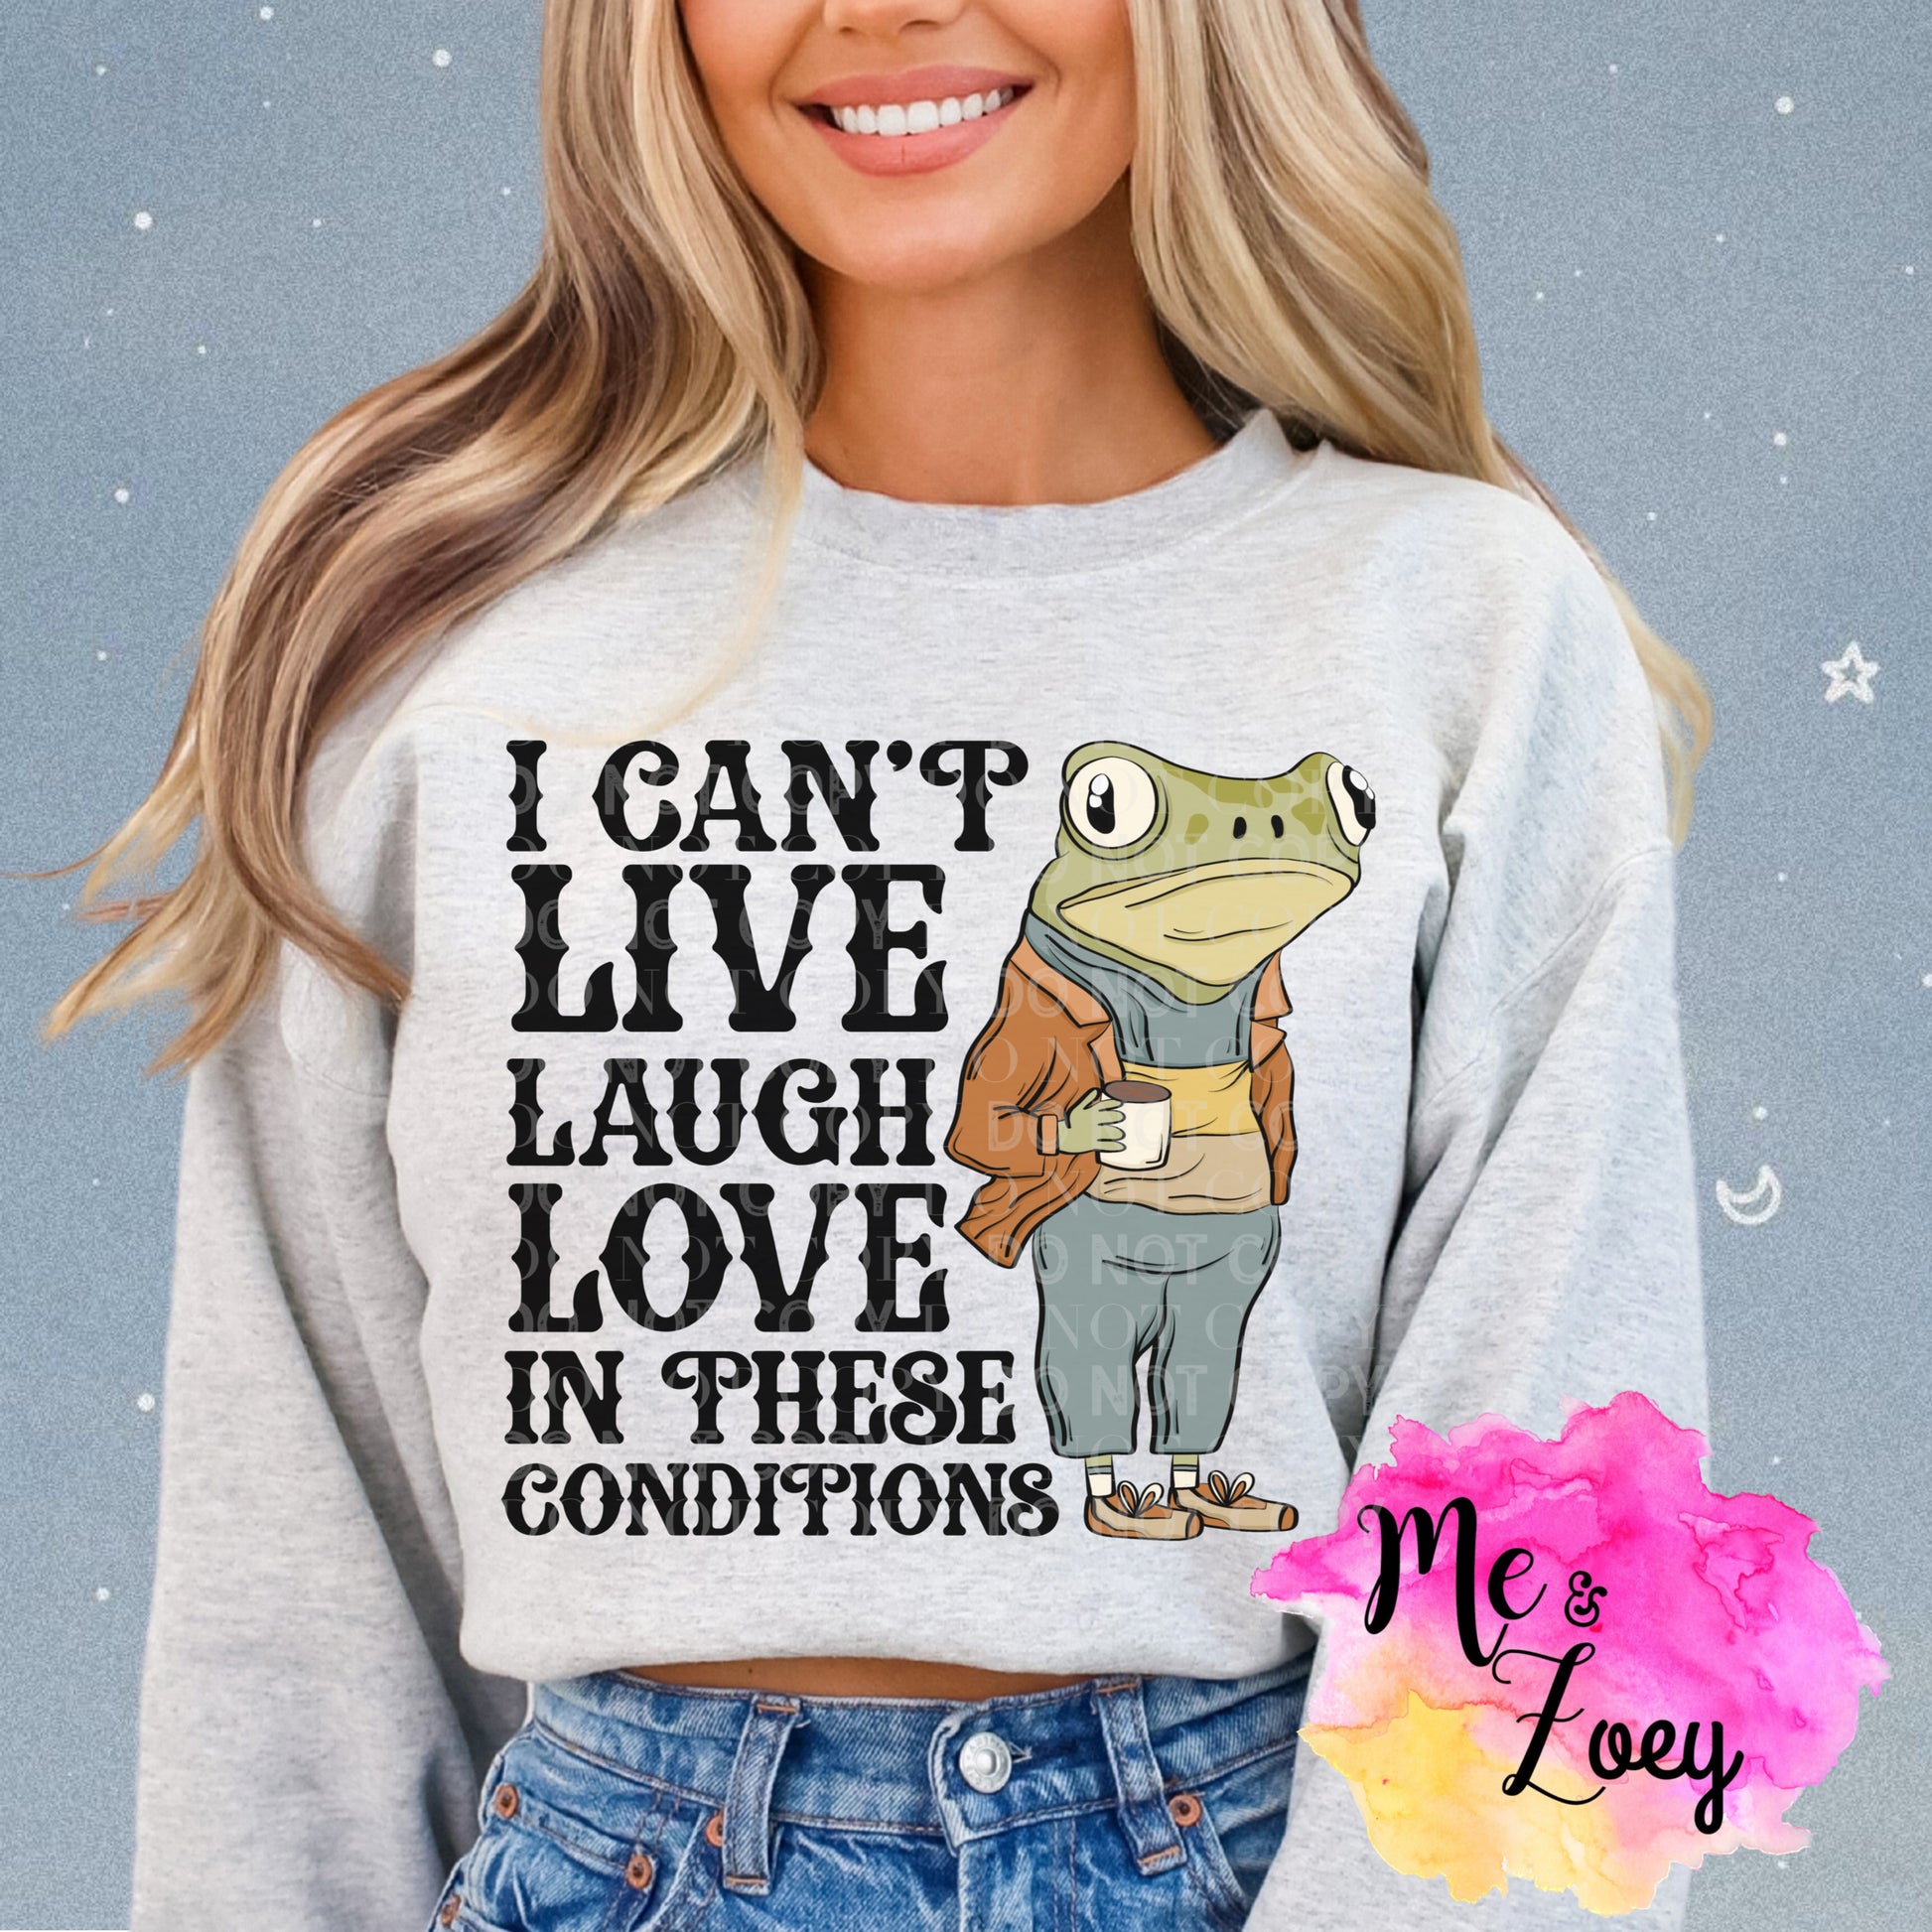 In These Conditions Graphic Sweatshirt - MeAndZoey